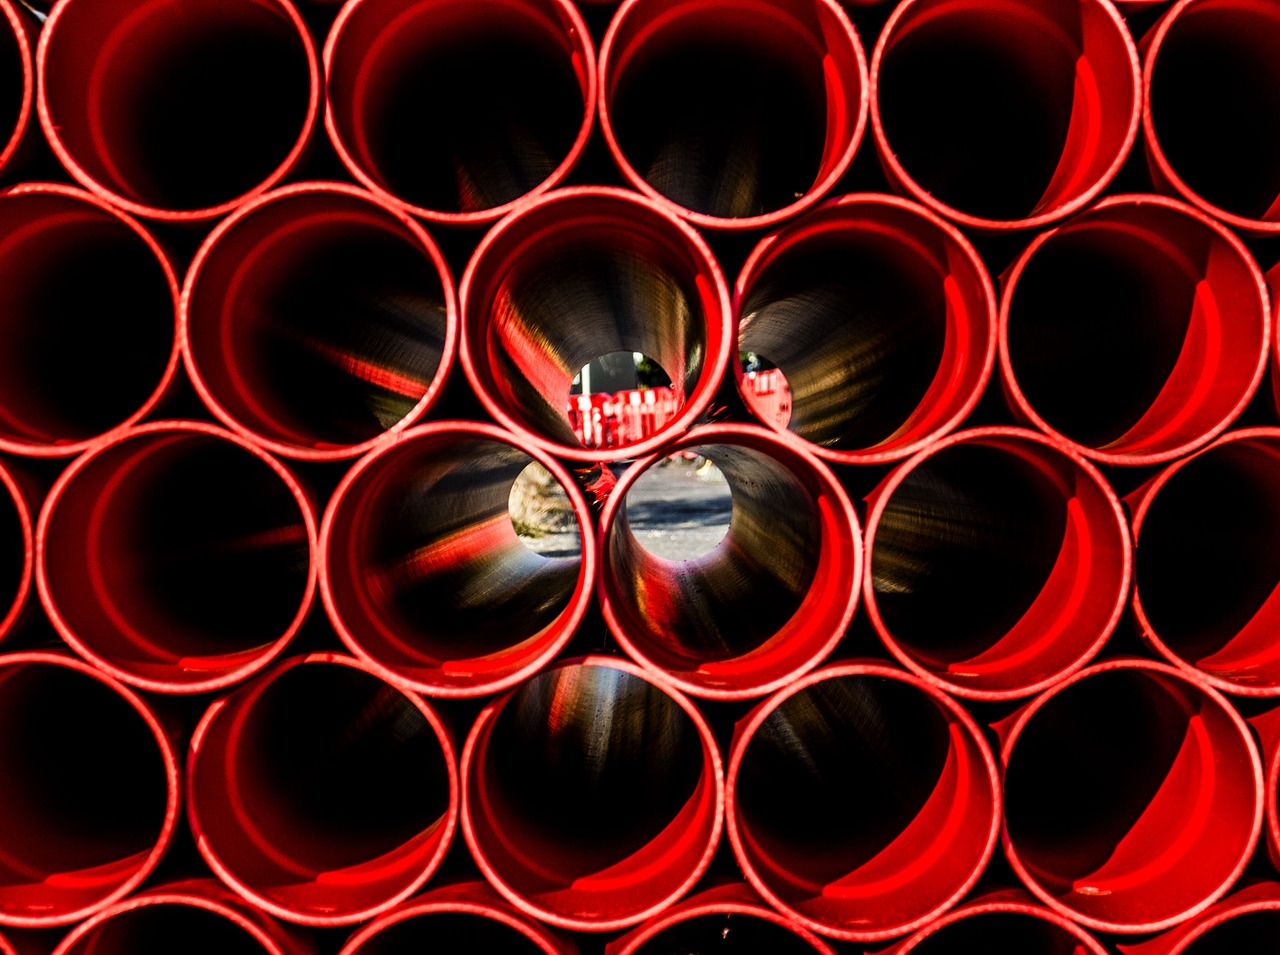 Image - construction tube red engineering